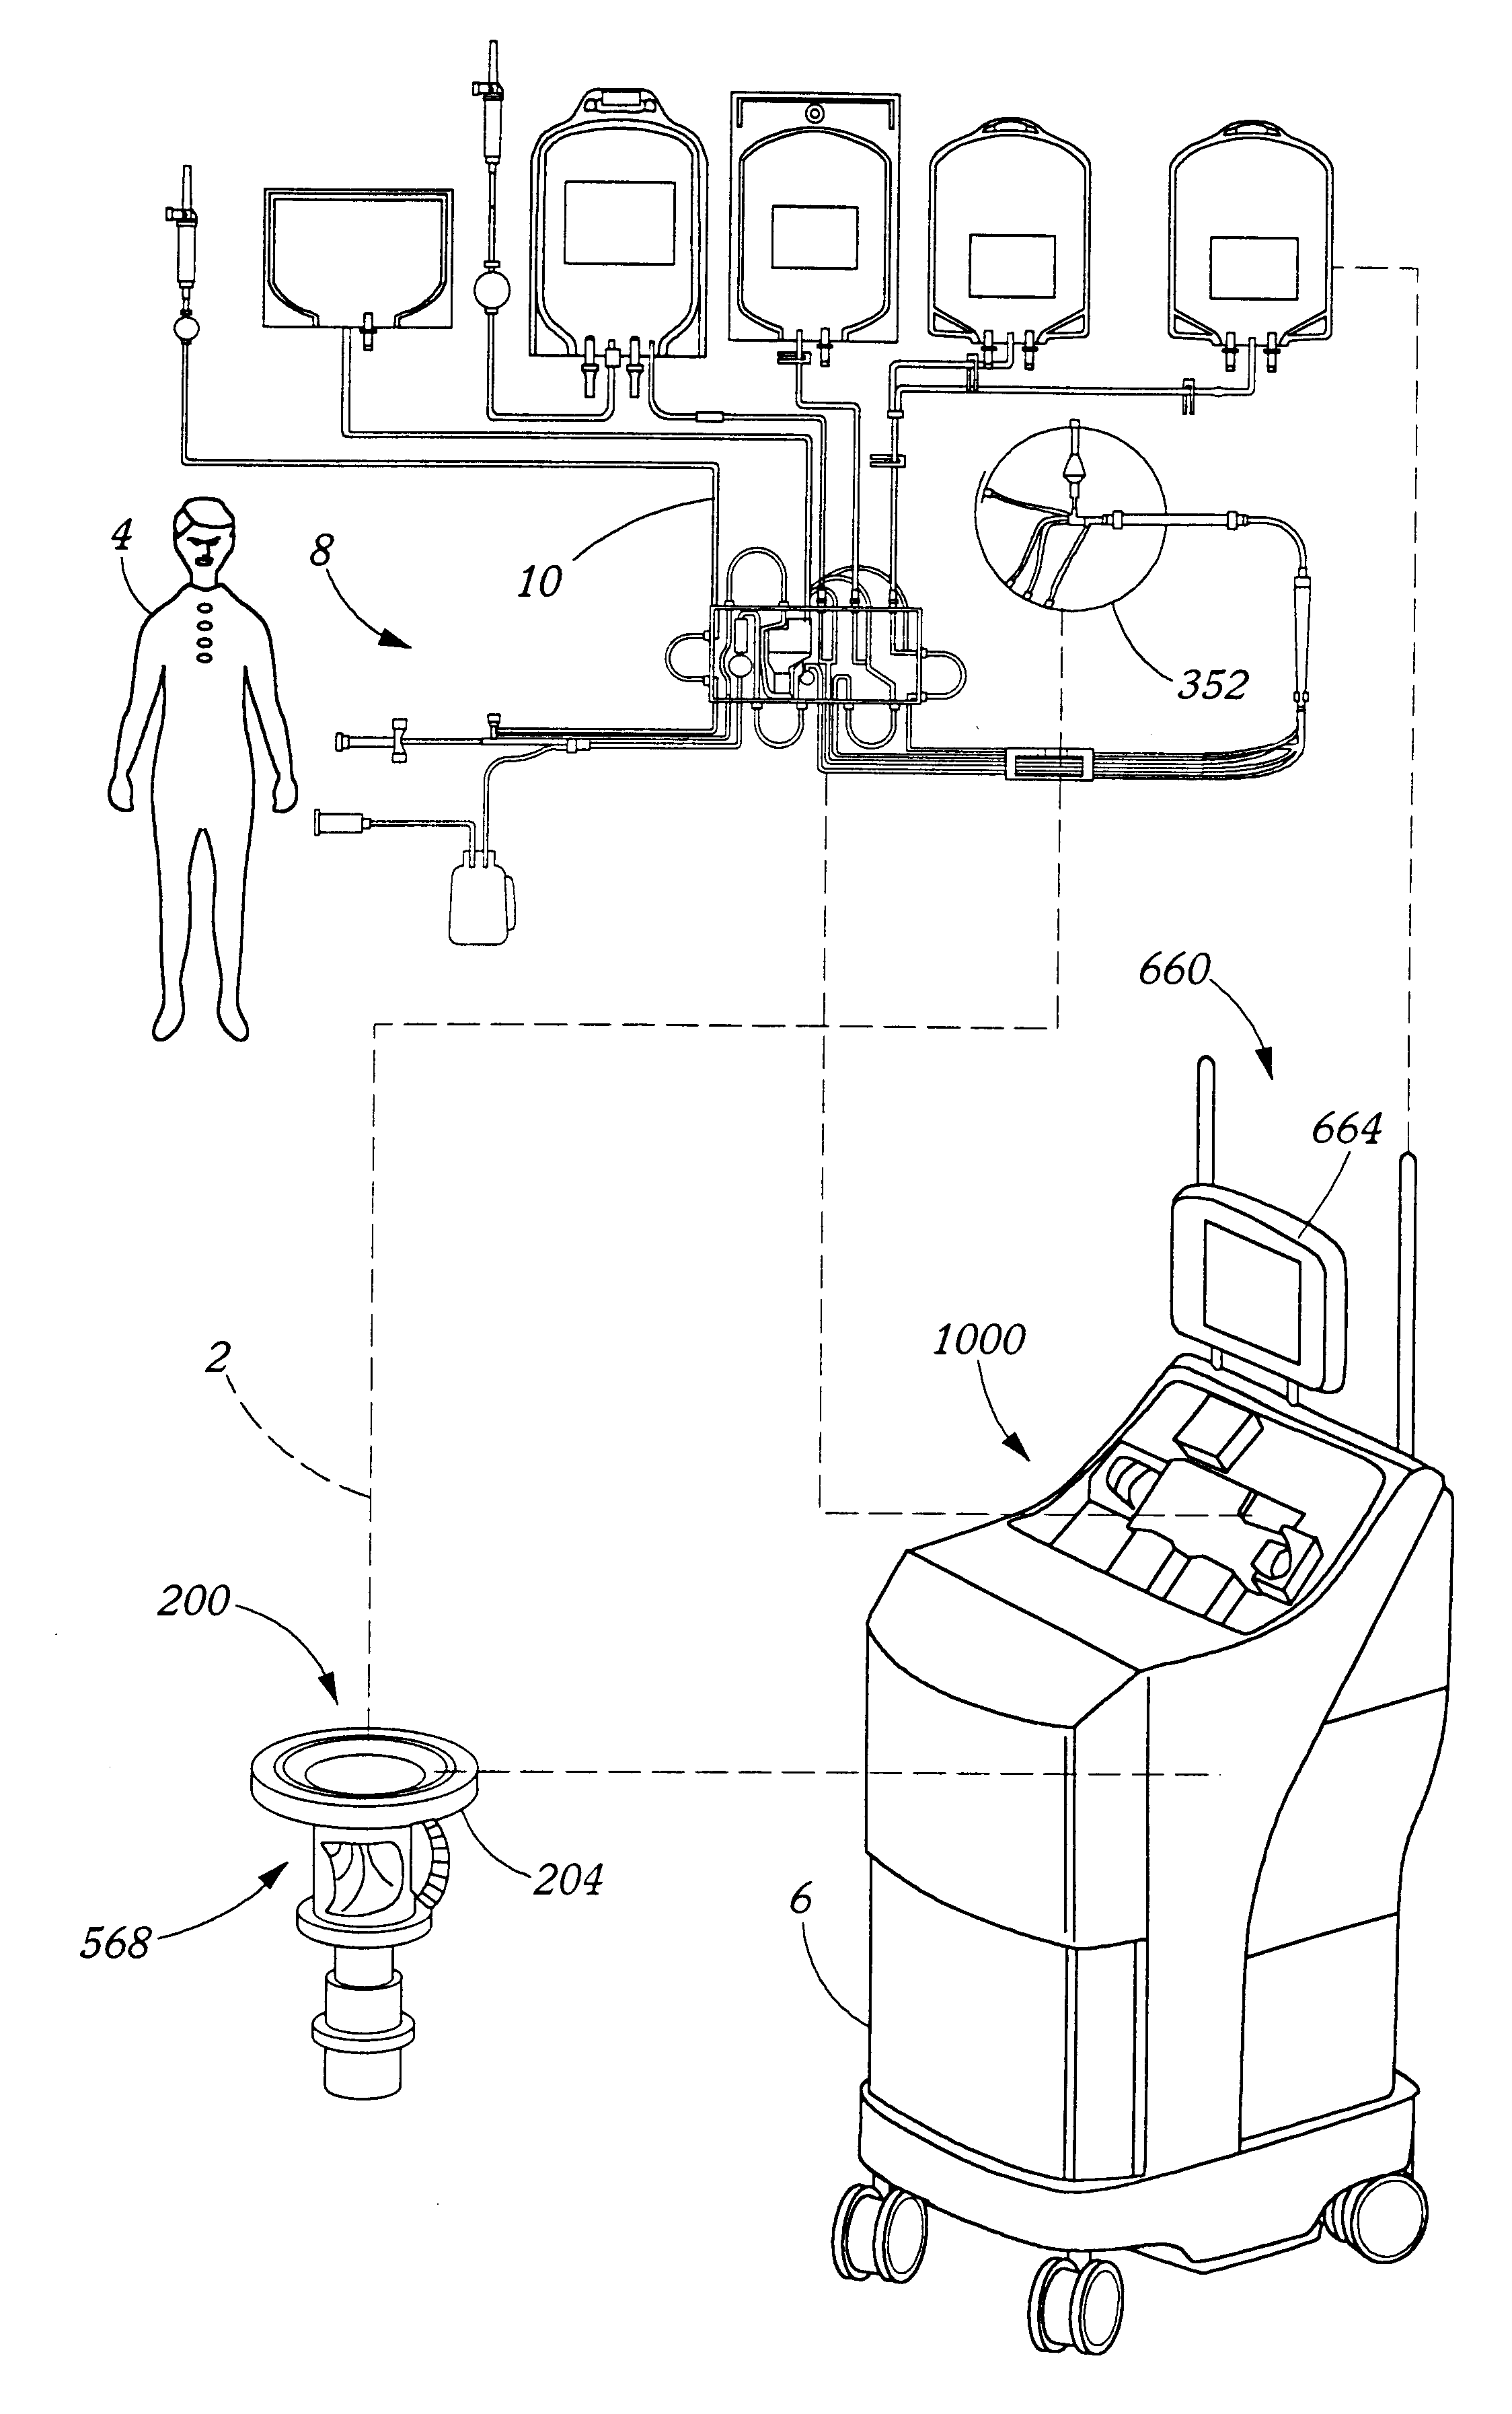 Extracorporeal blood processing methods and apparatus